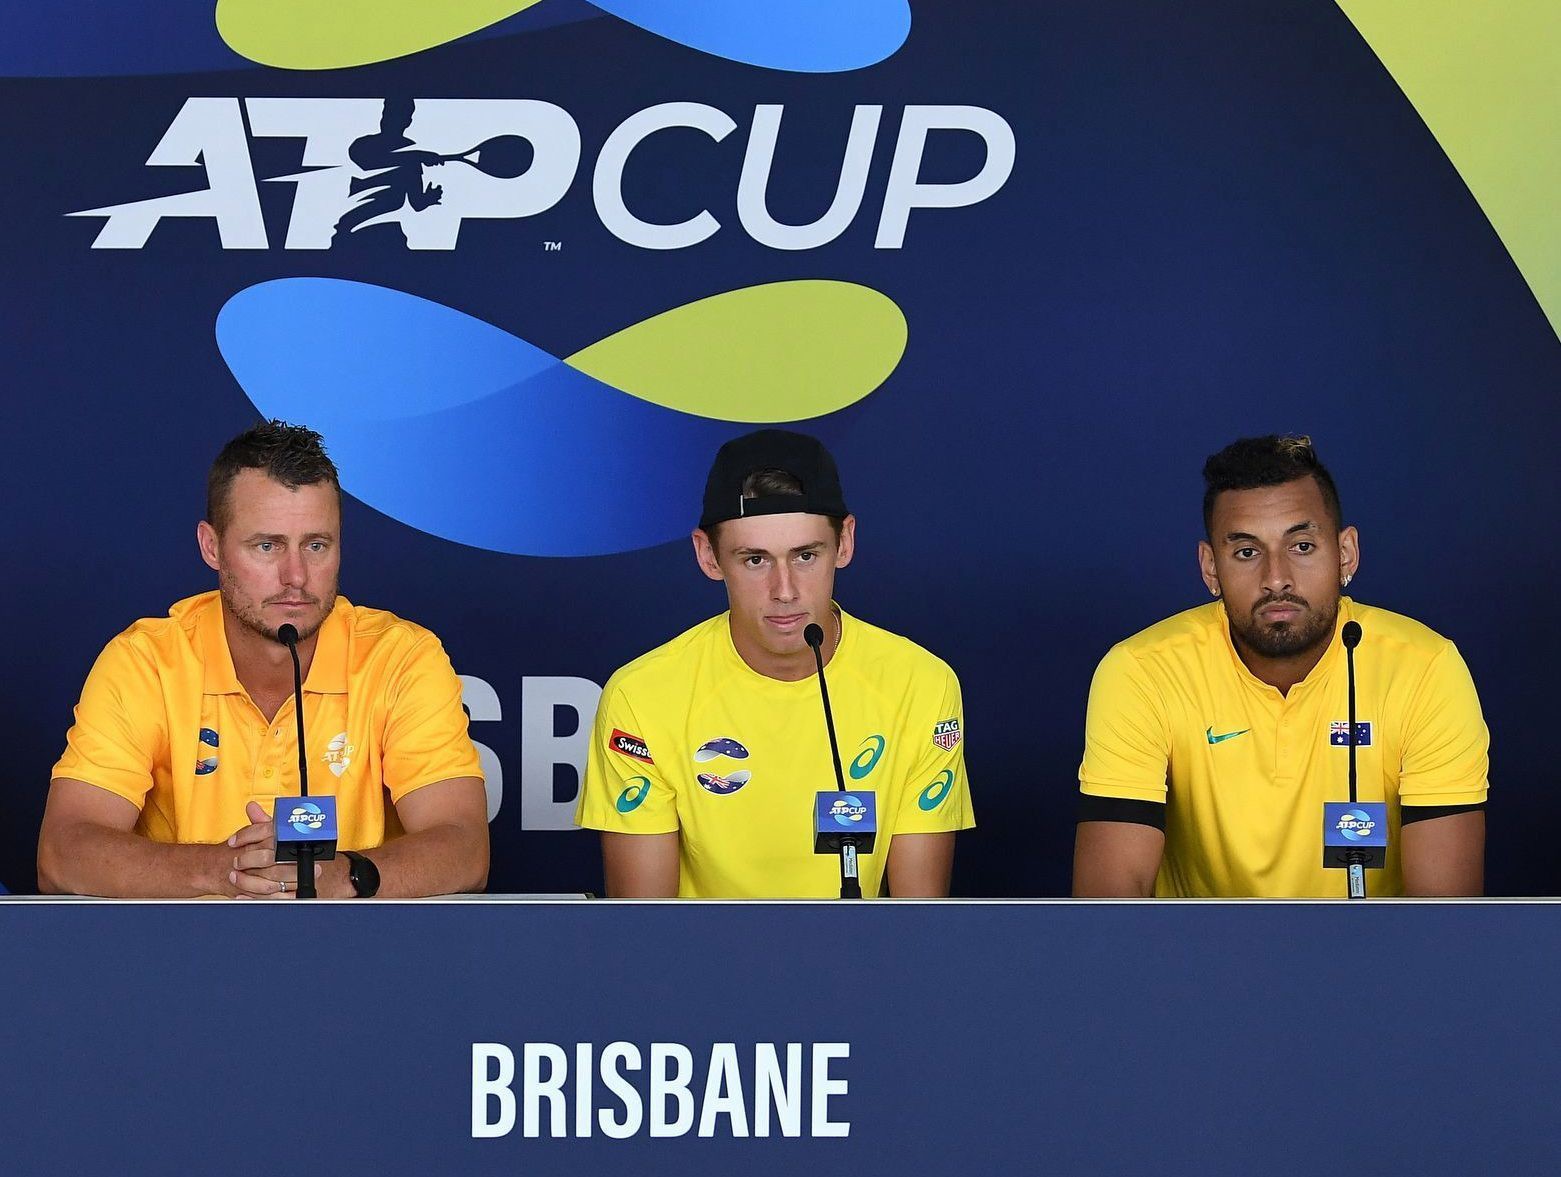 Team Australia faced the media and spoke about the devastating scenes in their country ahead of the inaugural ATP Cup